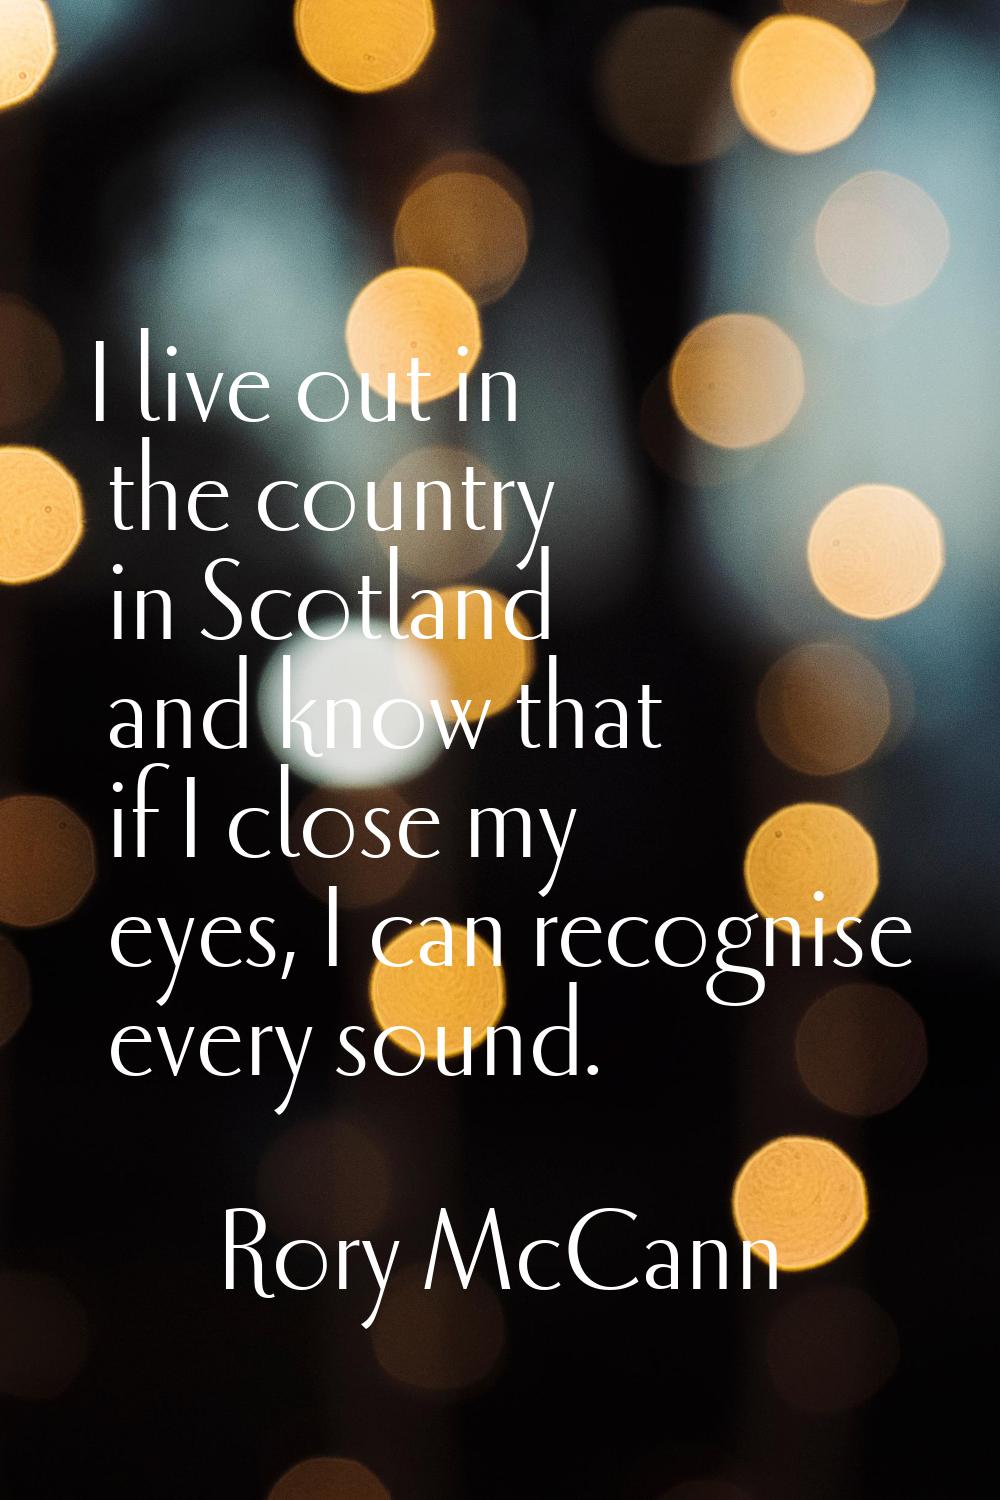 I live out in the country in Scotland and know that if I close my eyes, I can recognise every sound